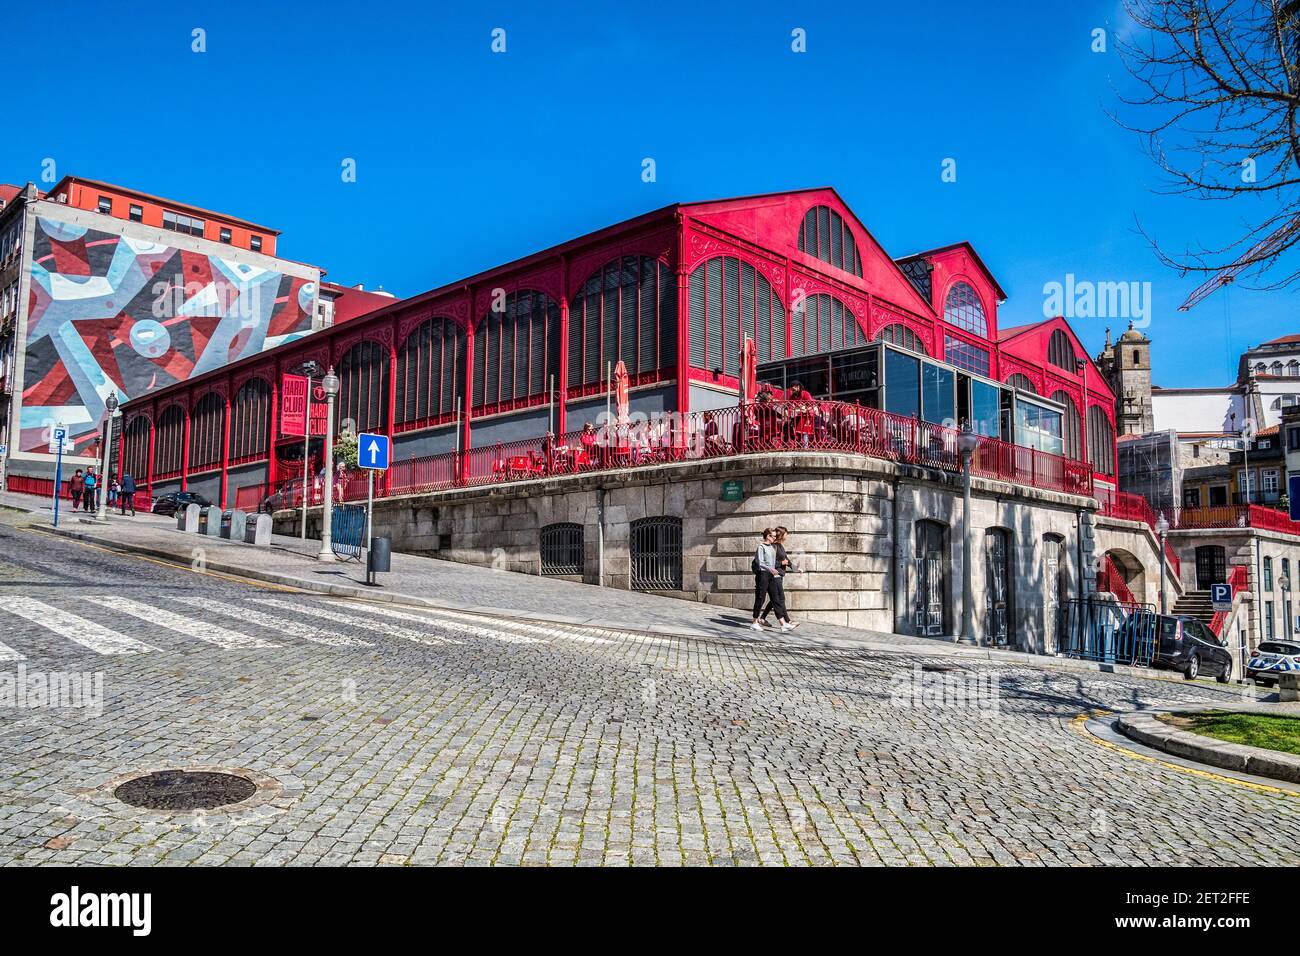 10 March 2020: Porto, Portugal - The Mercado Ferreira Borges, a market hall built in the 1880s in Porto, now a nightclub and restaurant. Stock Photo